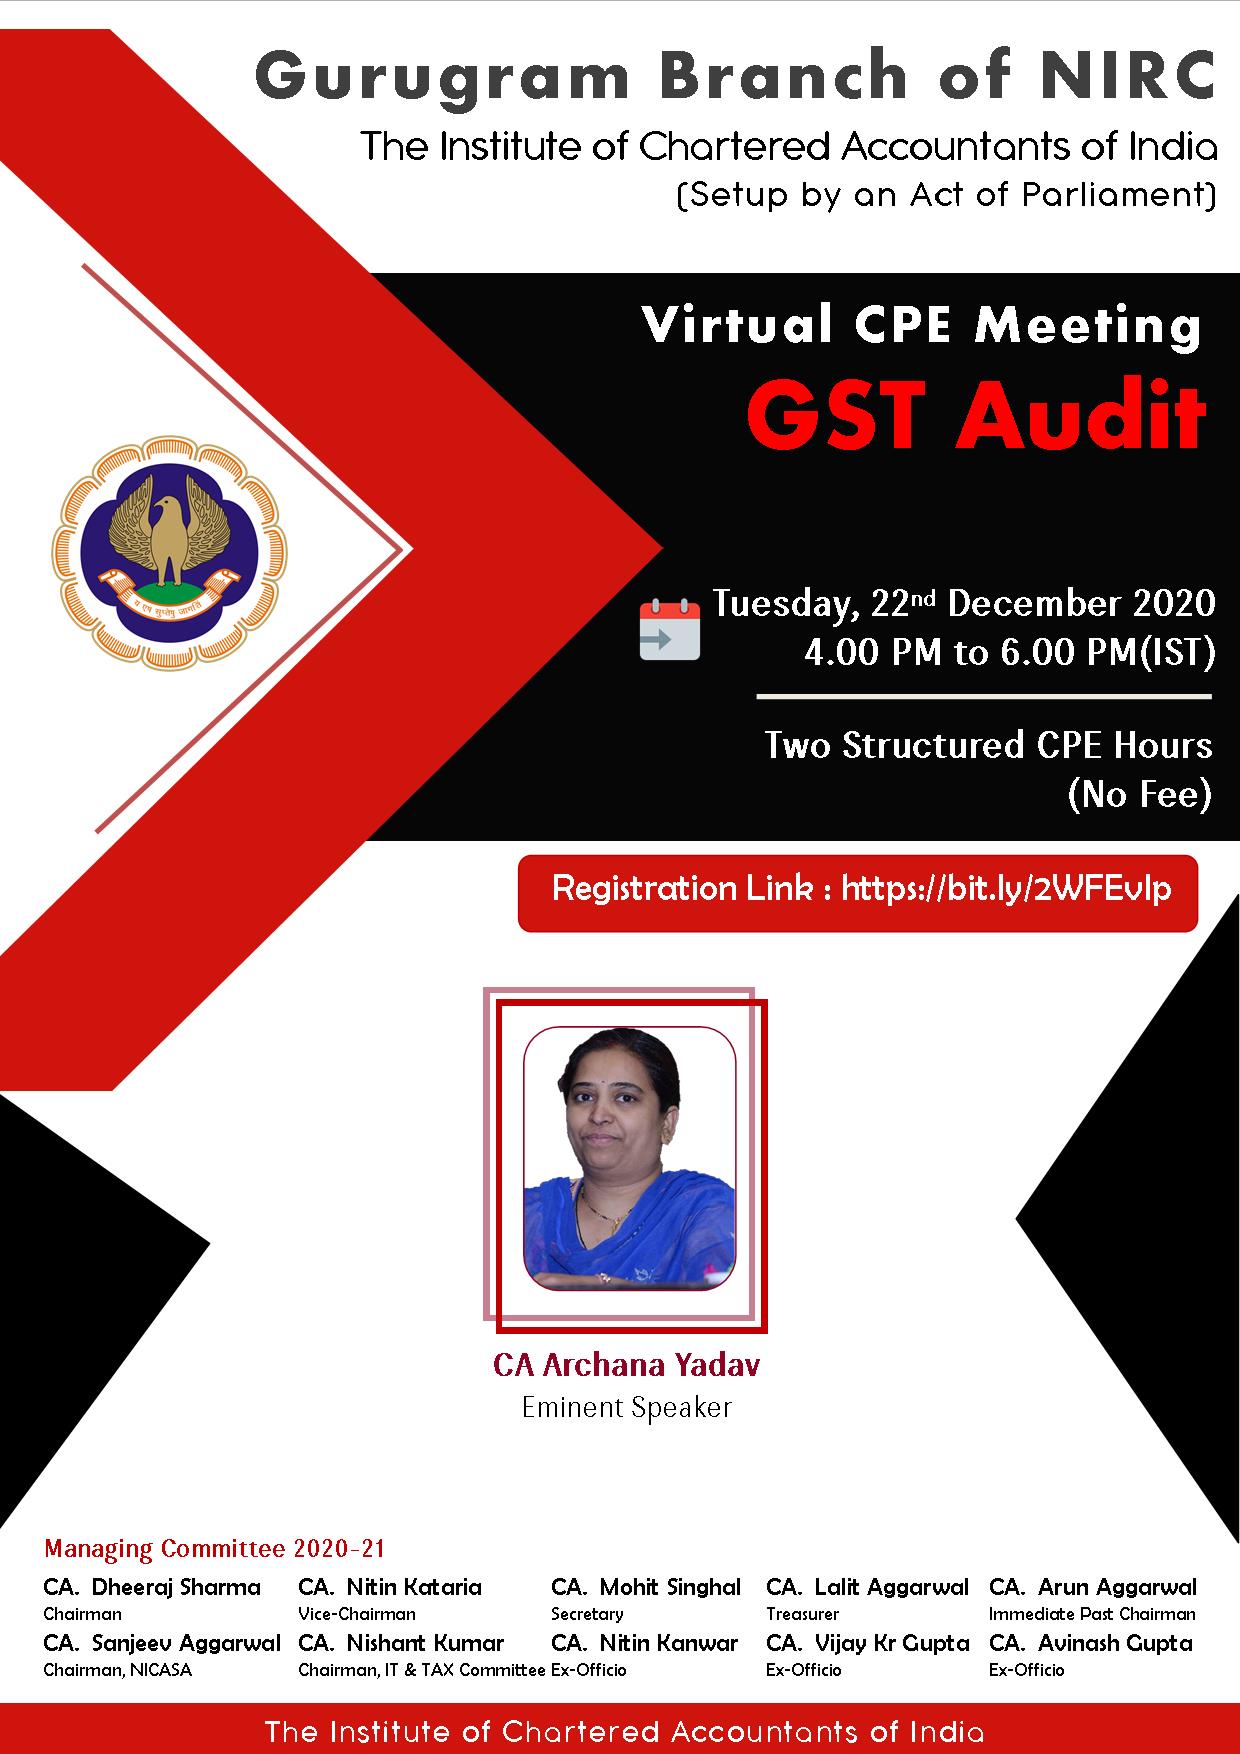 Virtual CPE Meeting on GST Audit